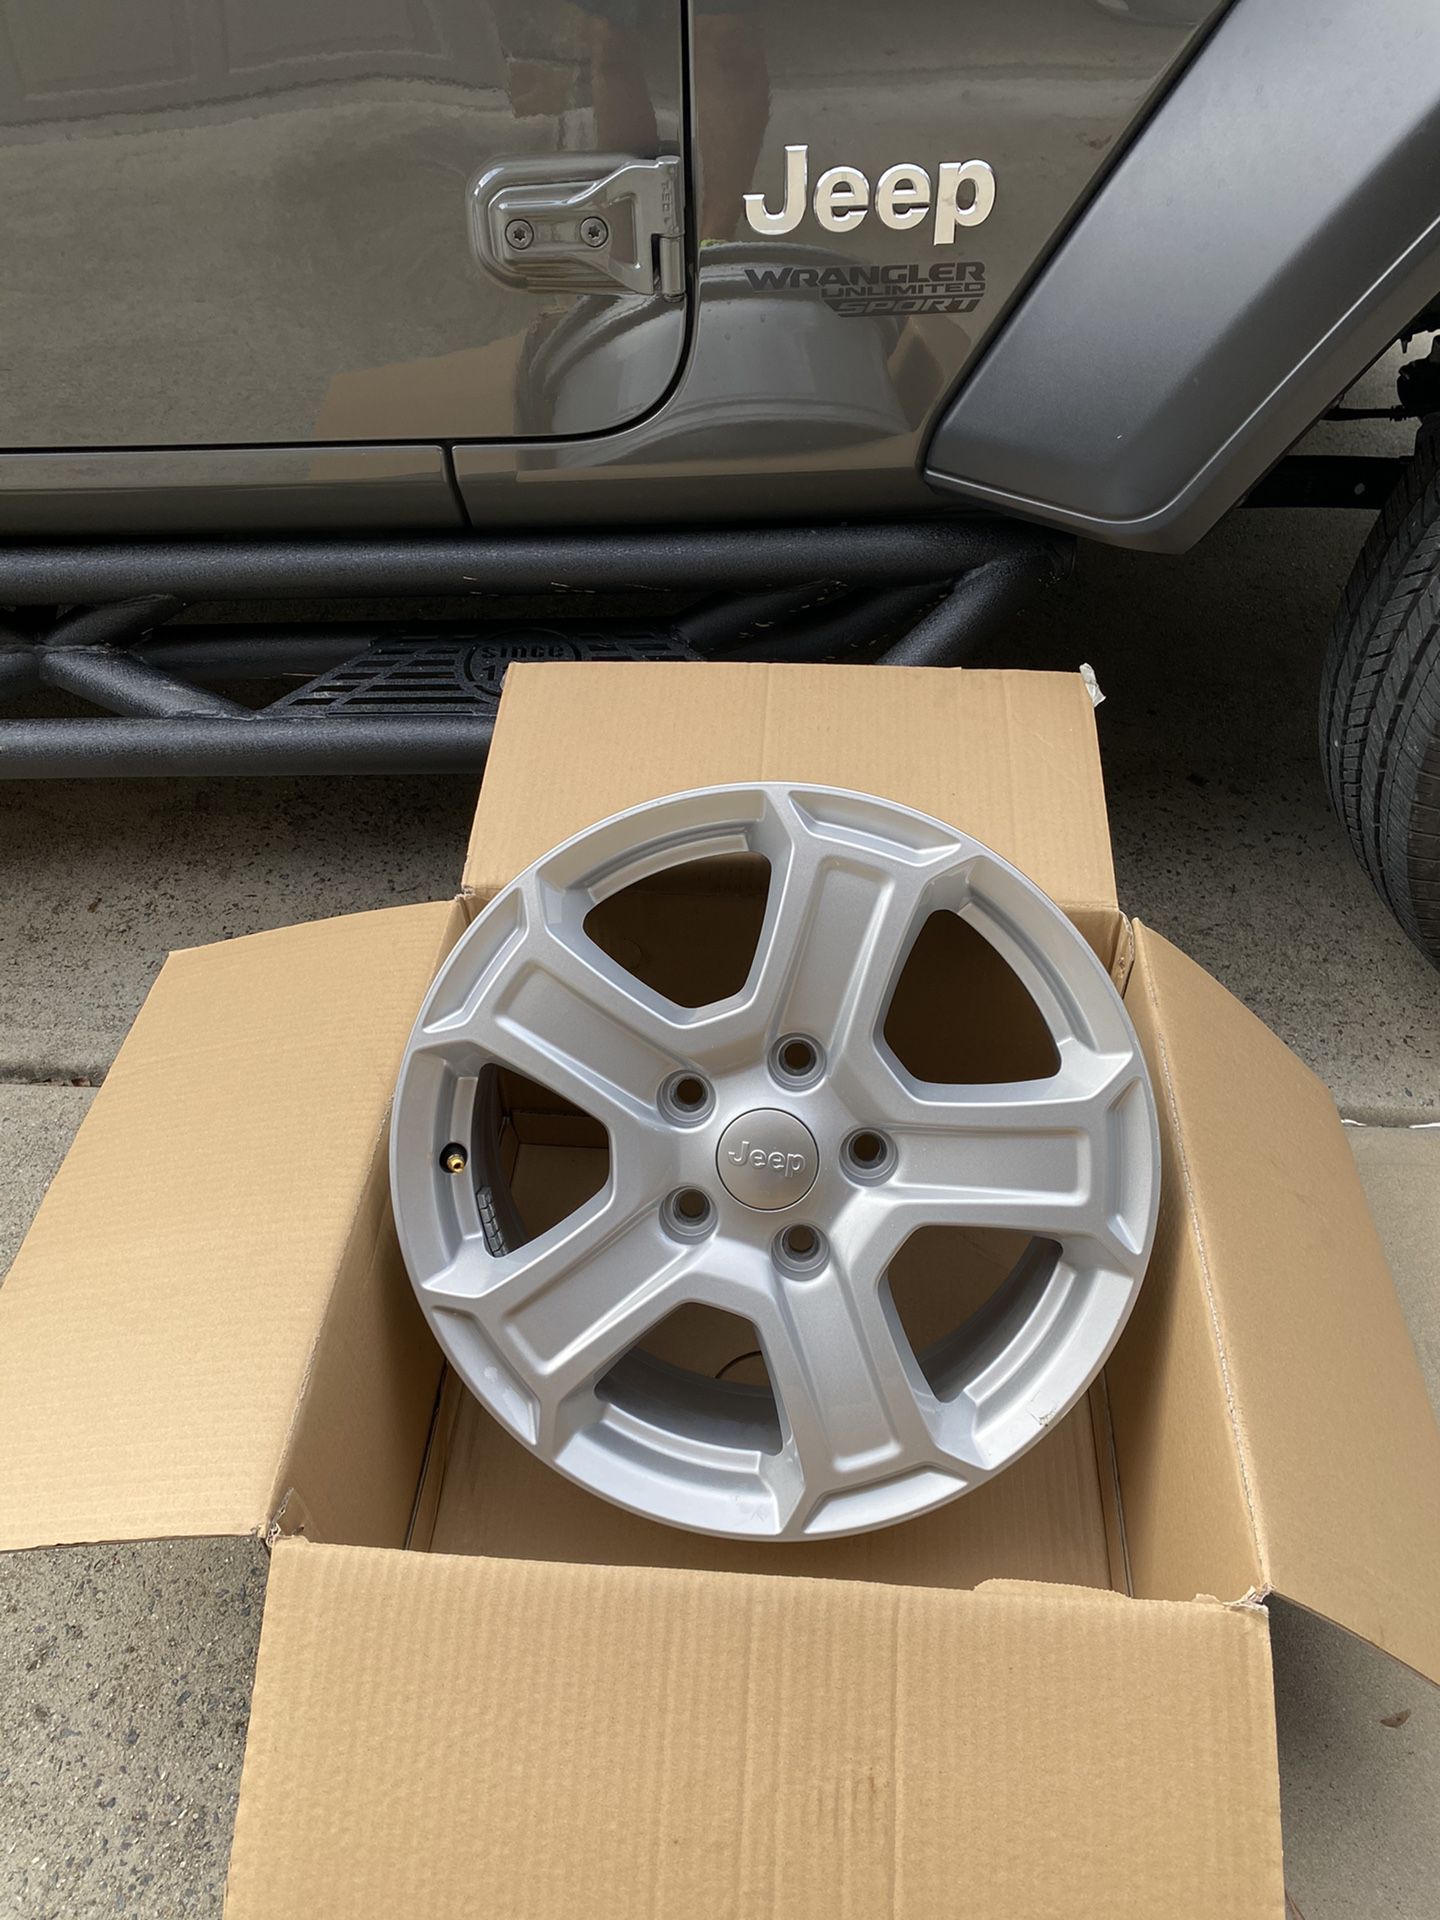 New 17” wheels from 2020 Jeep (set of 5)